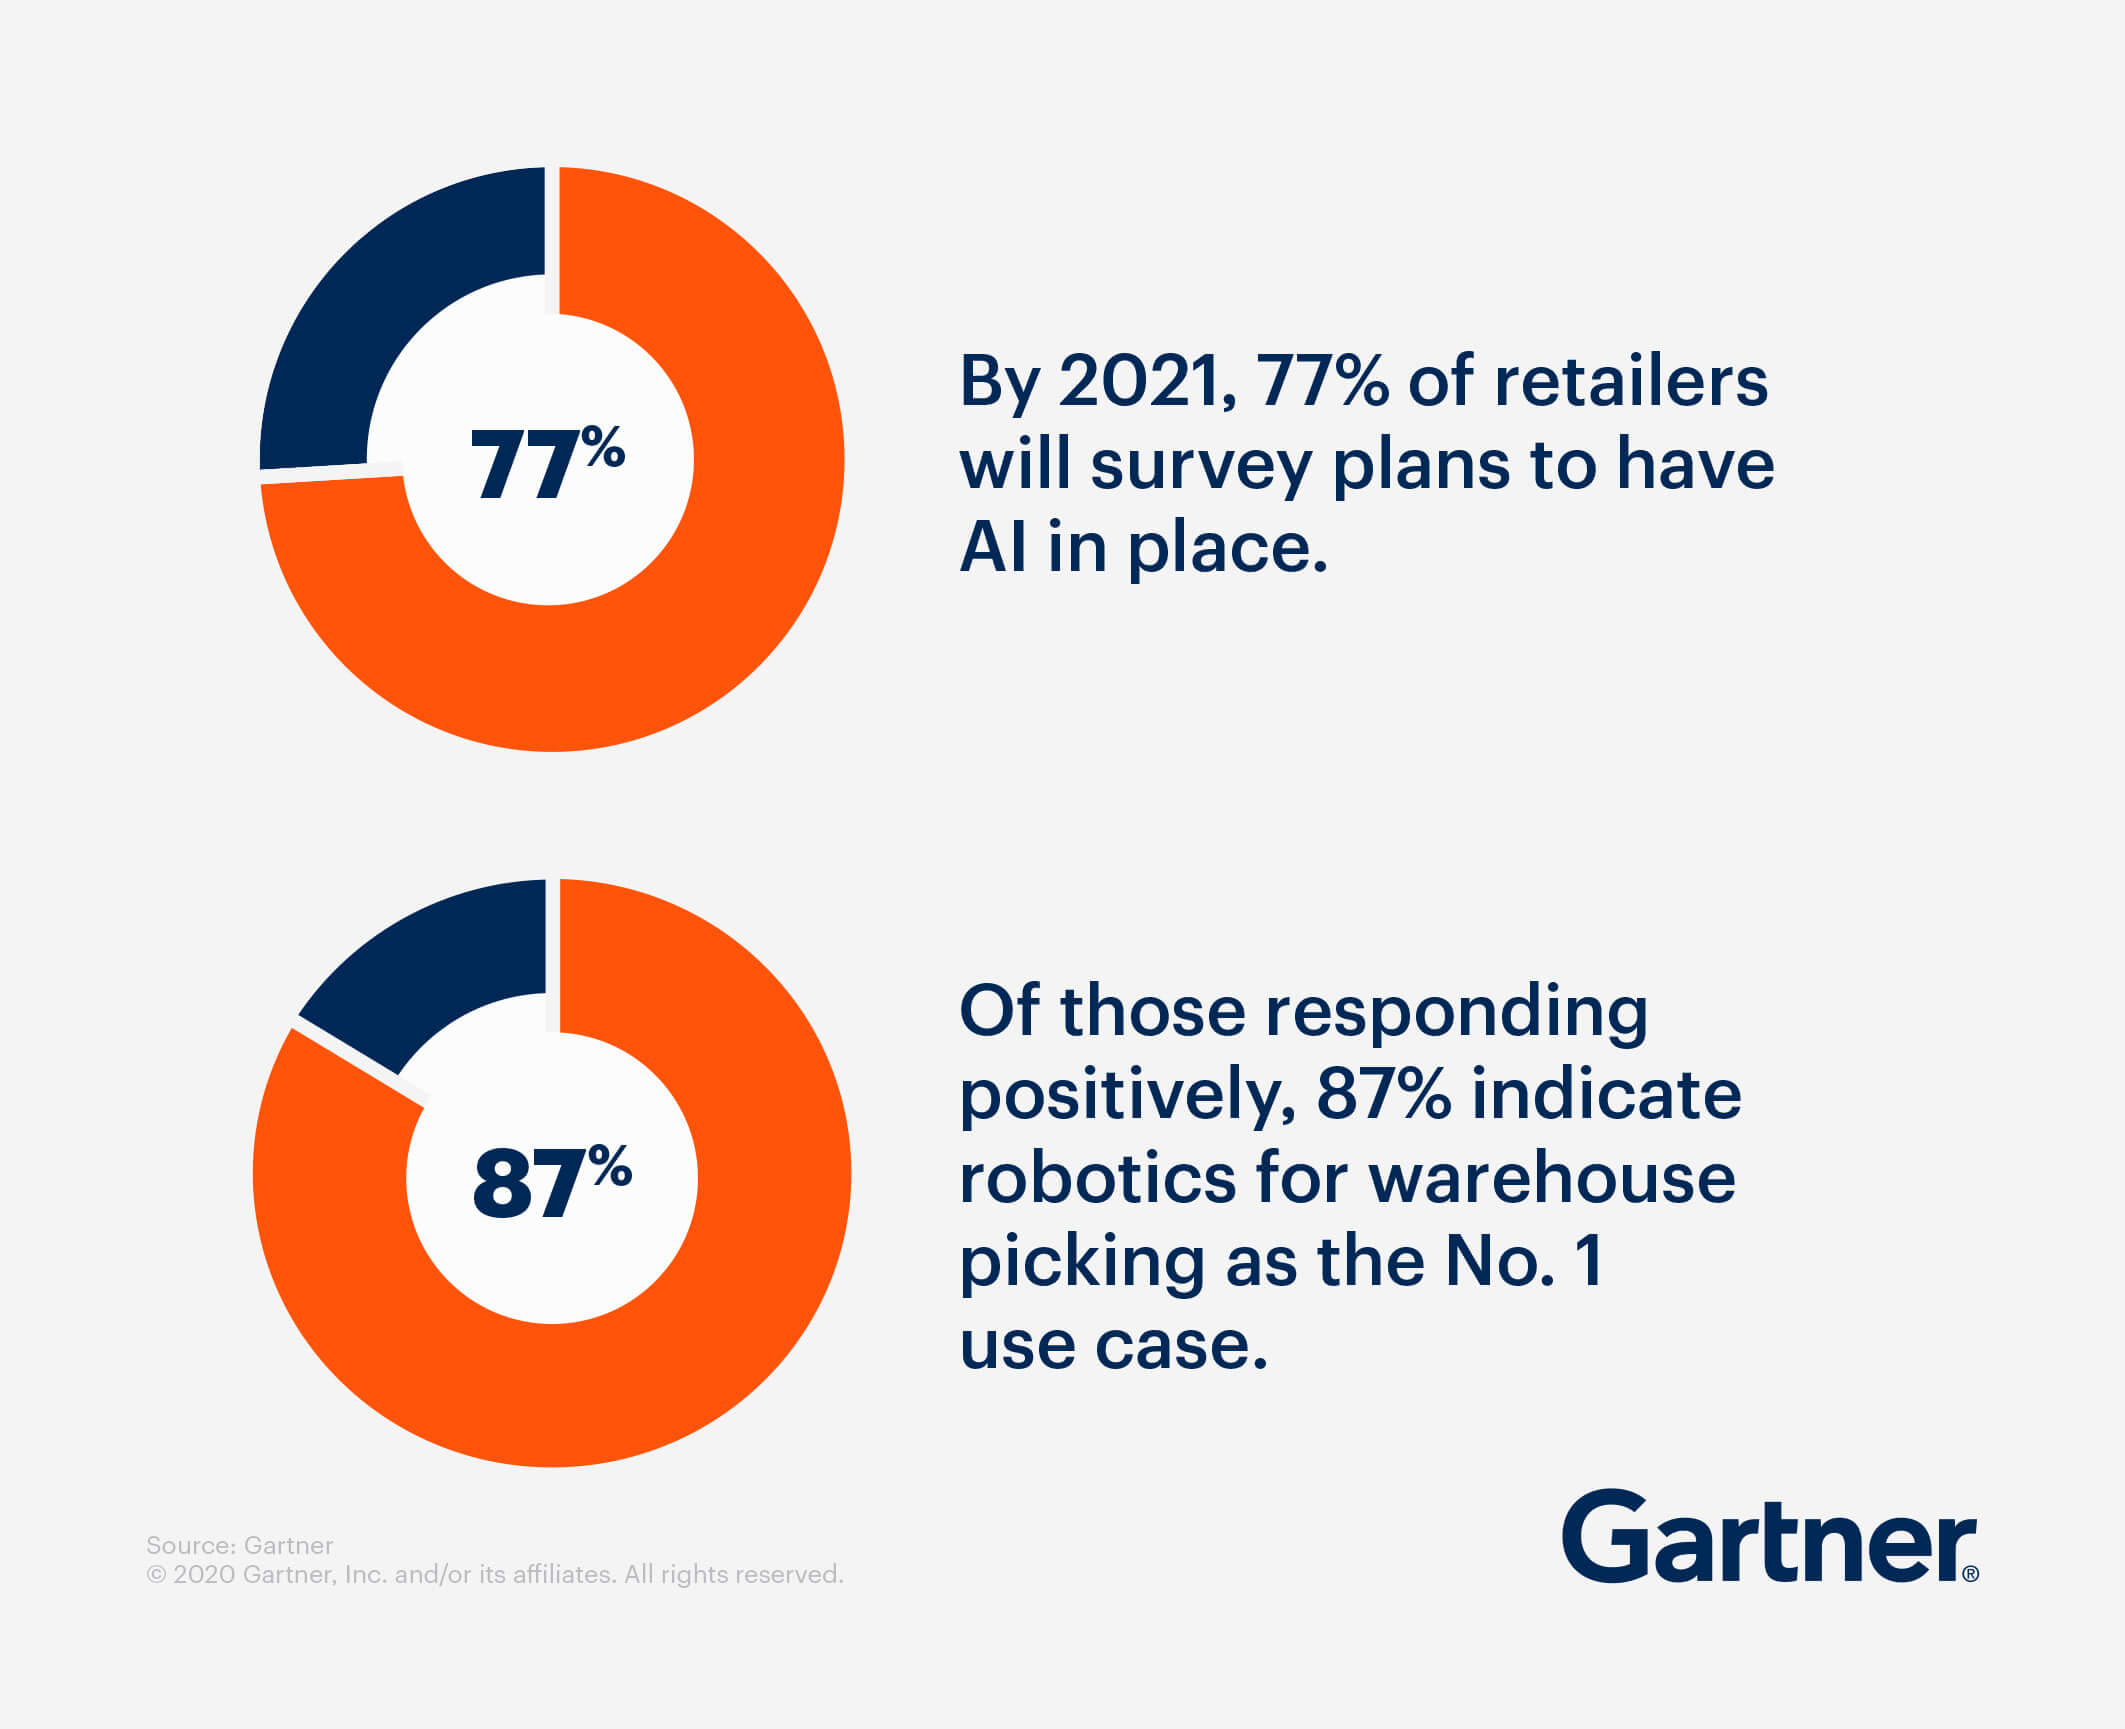 By 2021, 77% of retailers will survey plans to have AI in place. Of those responding positively, 87% indicate robotics for warehouse picking as the No. 1 use case.